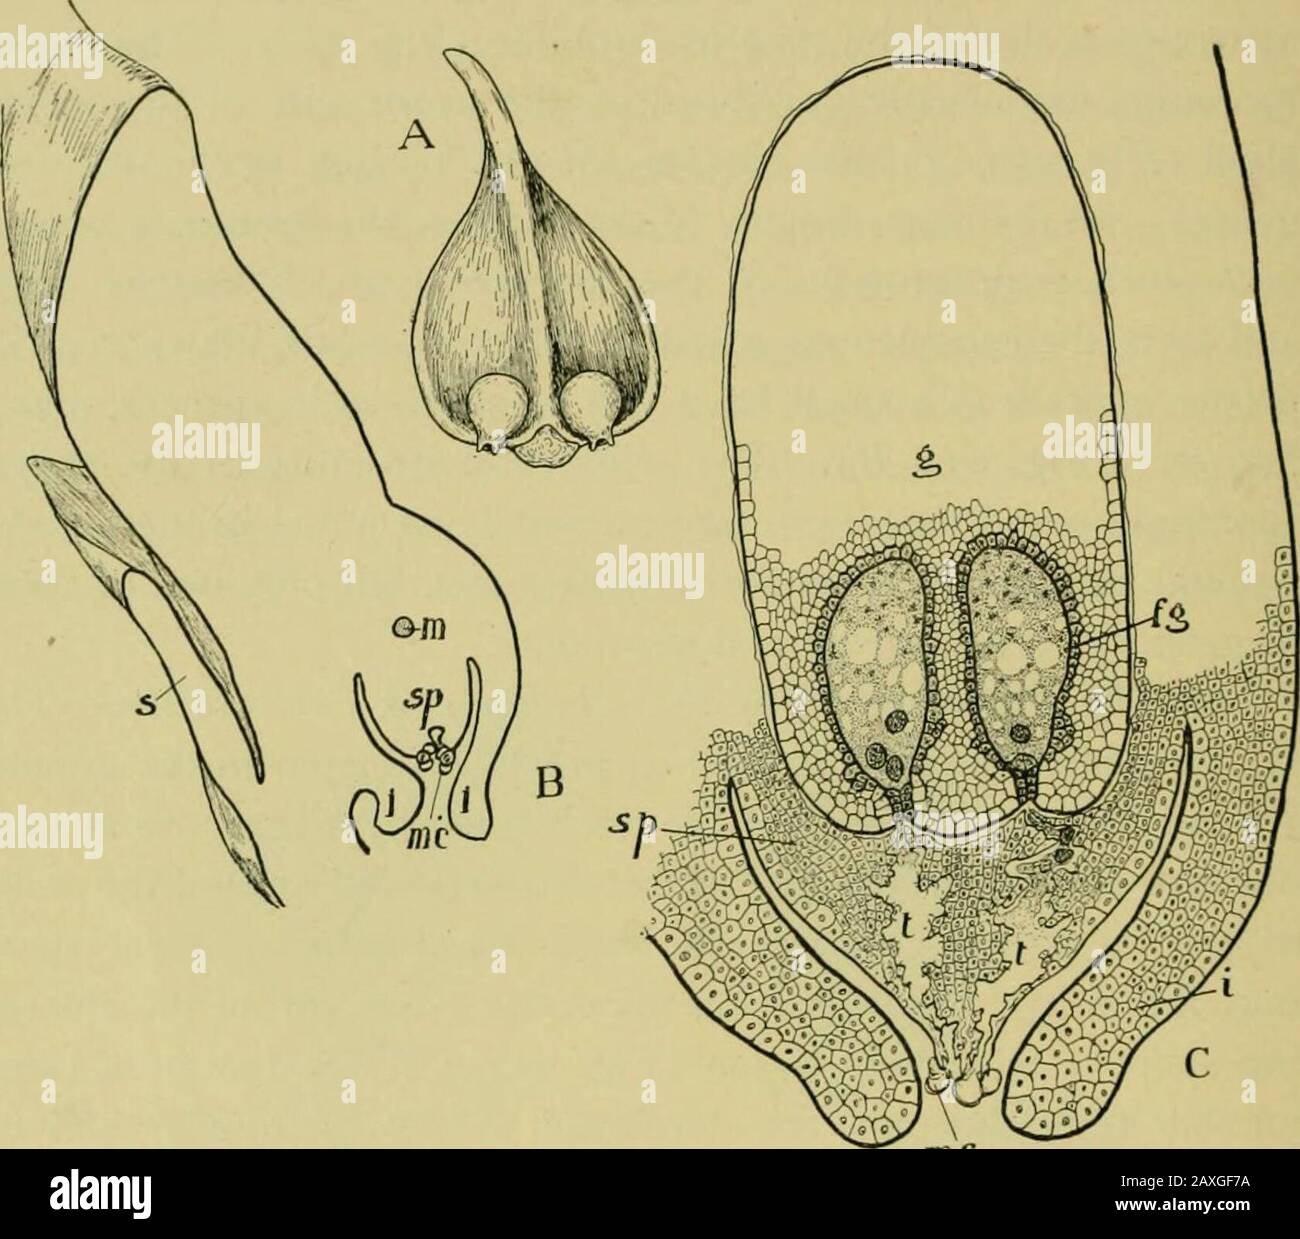 Nature and development of plants . ale gamete which is surrounded by nour-ishing cells as in the cycads. You notice that there is no cham-ber formed above the archegonia, and it would be a natural infer-ence that the male gametophyte must be of a somewhat differentcharacter from that of the cycads in order to meet this new de-parture. The microspores which have already begun to germi-nate when discharged from their sporangia are carried by thewind to the megasporophylls which are slightly spread apart atthis time, permitting the microspores to rattle down to the mega-sporangia. The microspores Stock Photo